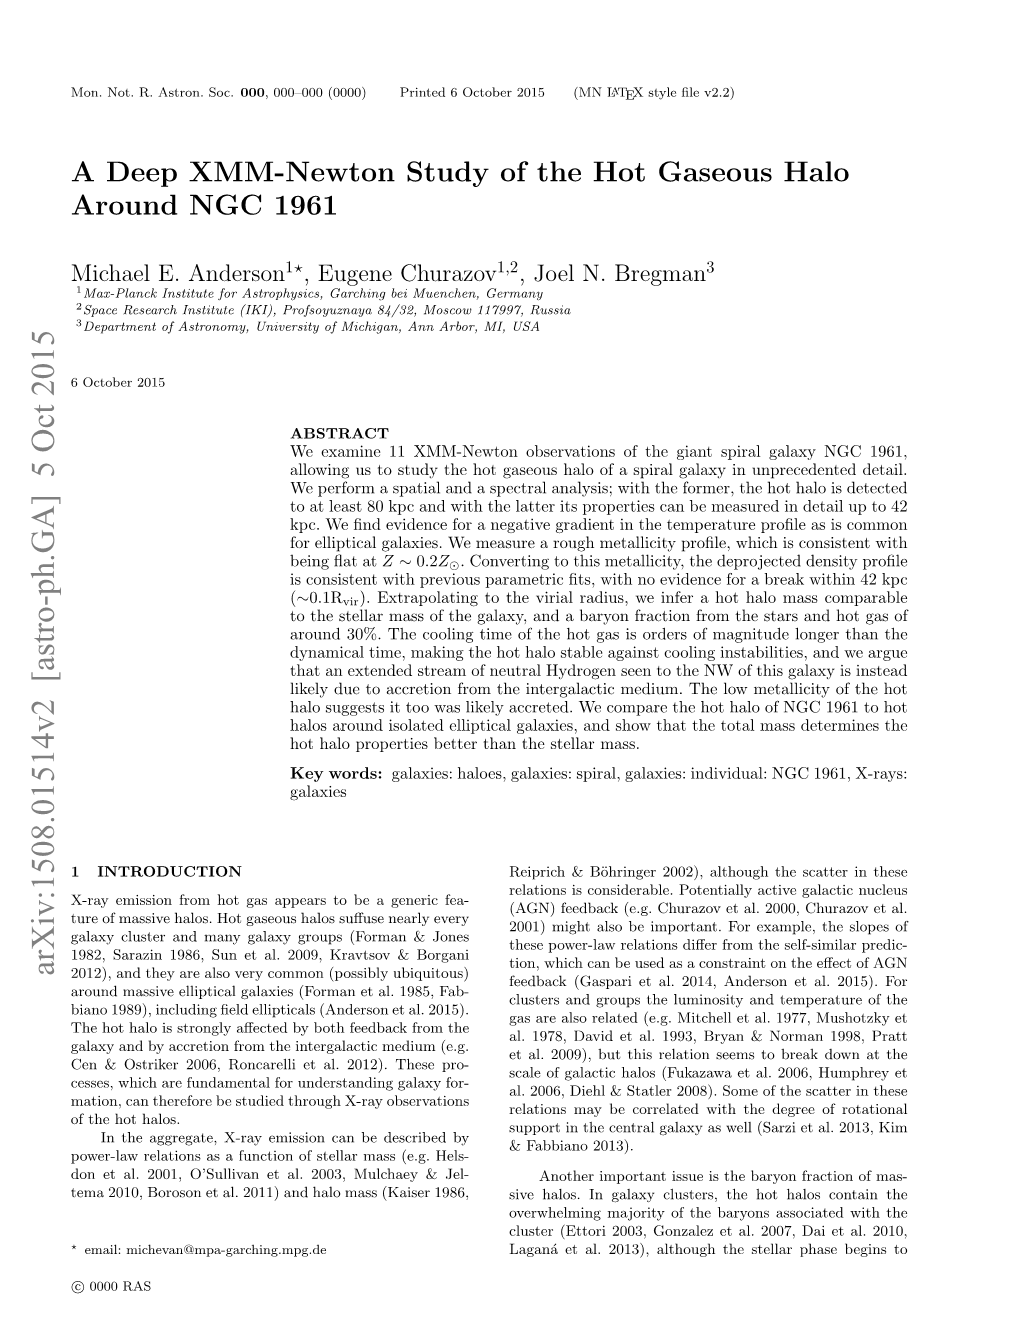 A Deep XMM-Newton Study of the Hot Gaseous Halo Around NGC 1961